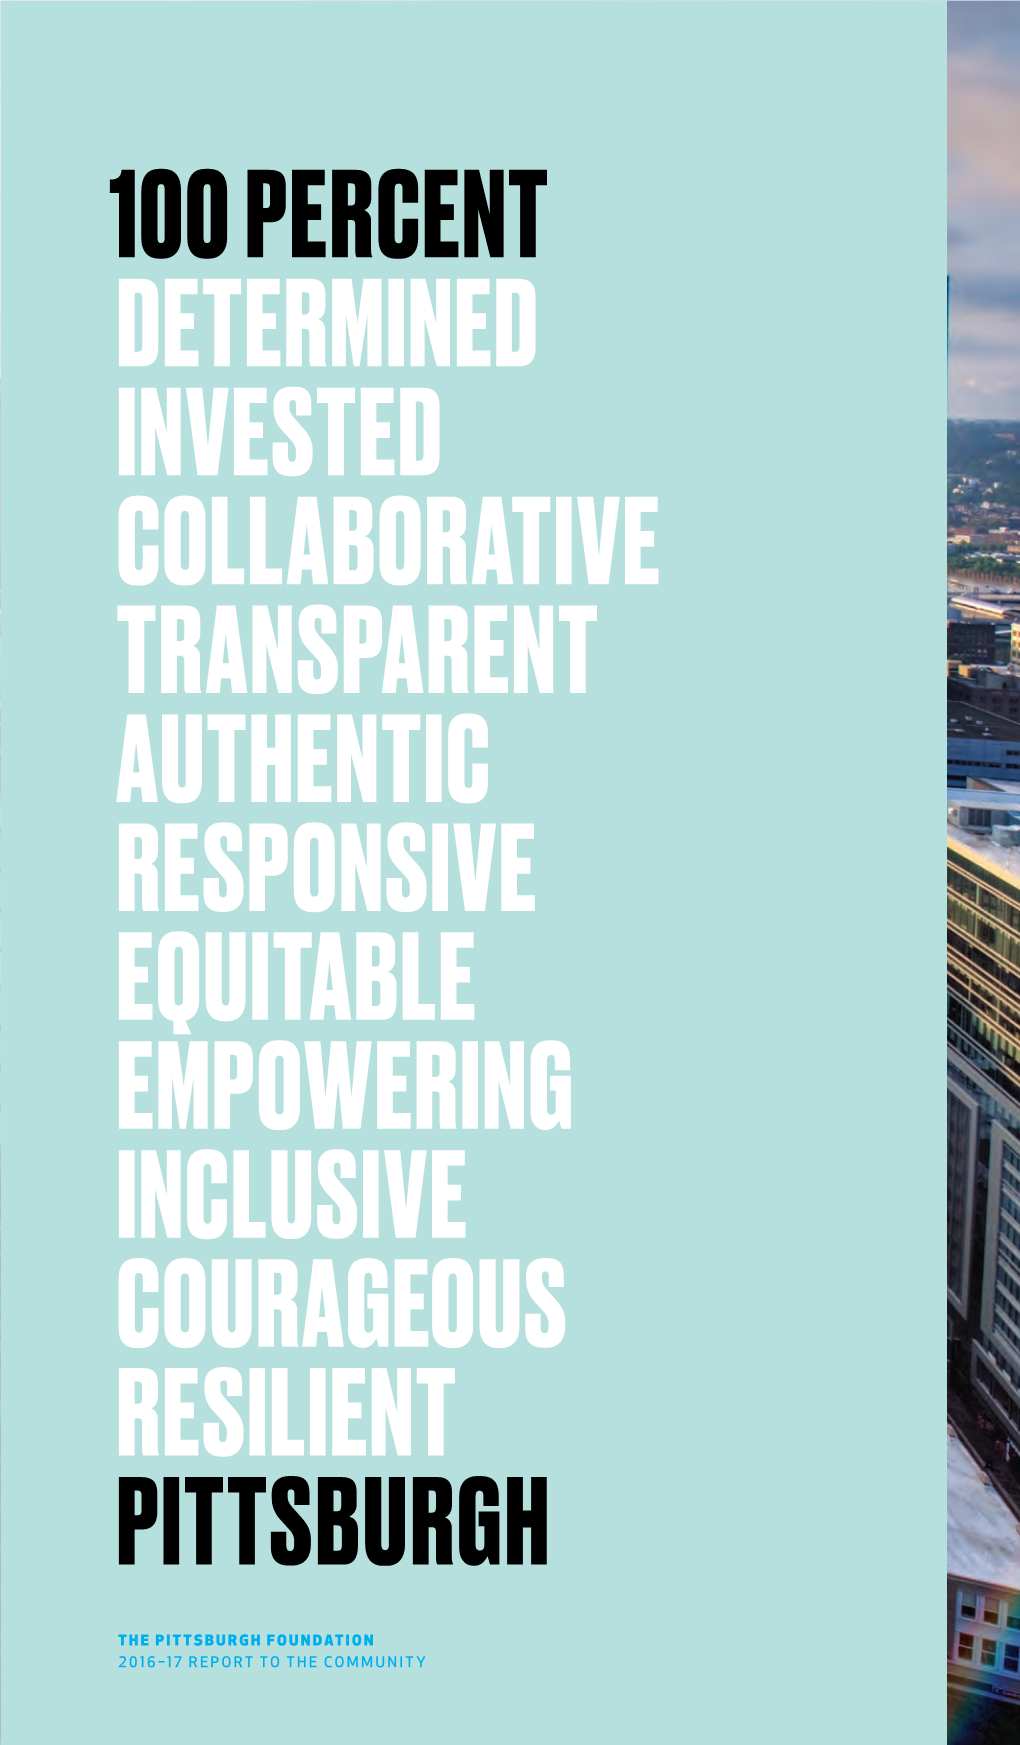 100 Percent Determined Invested Collaborative Transparent Authentic